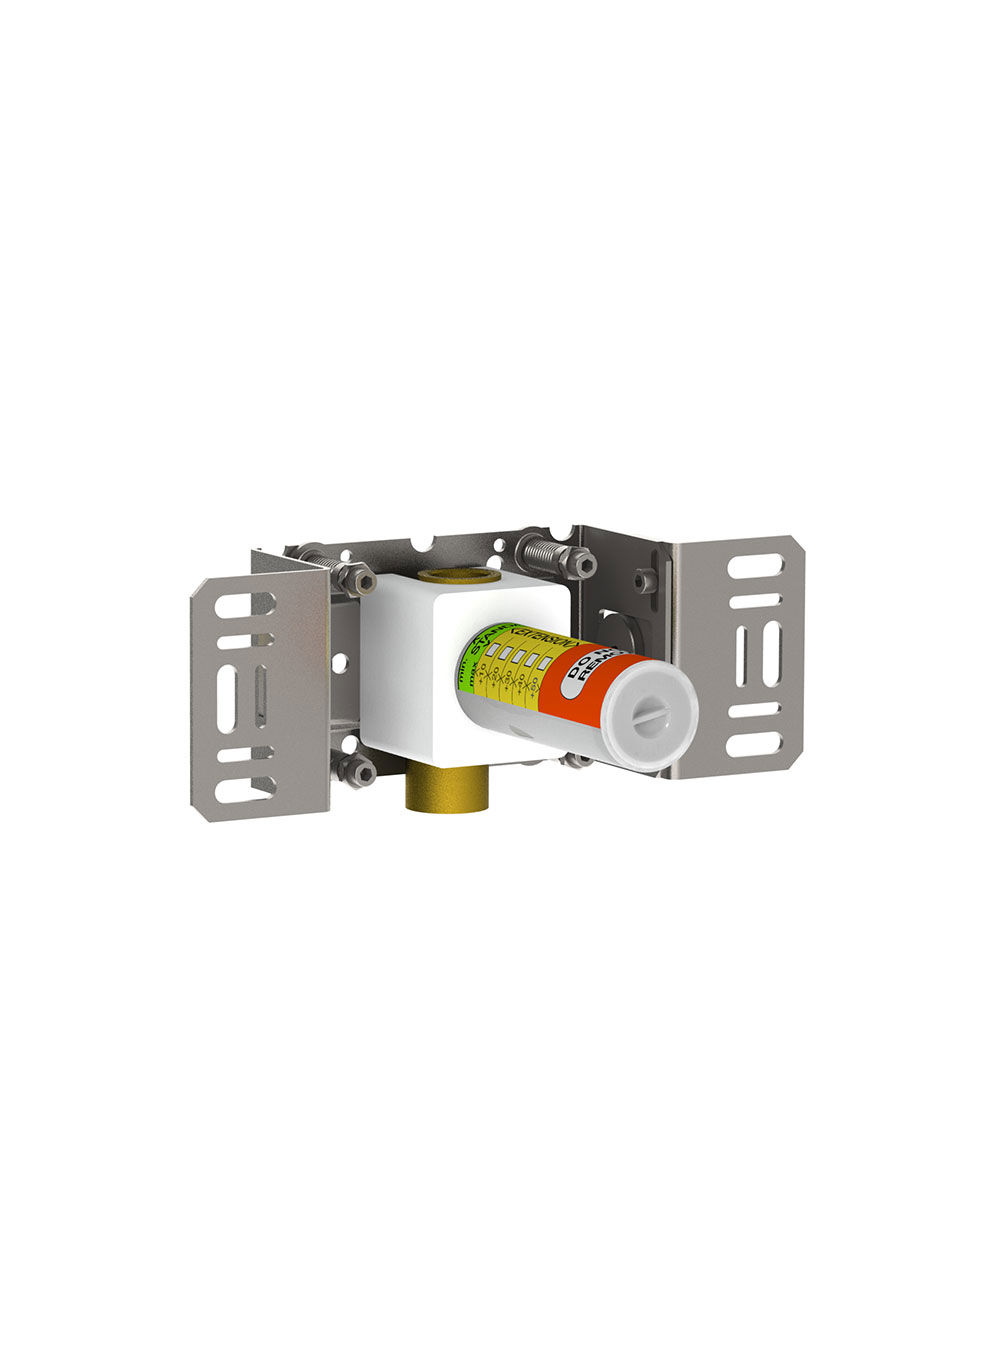 S21V: Build-in stop valve, ¾". ¾" connection to copper, steel, iron or pex pipe work.